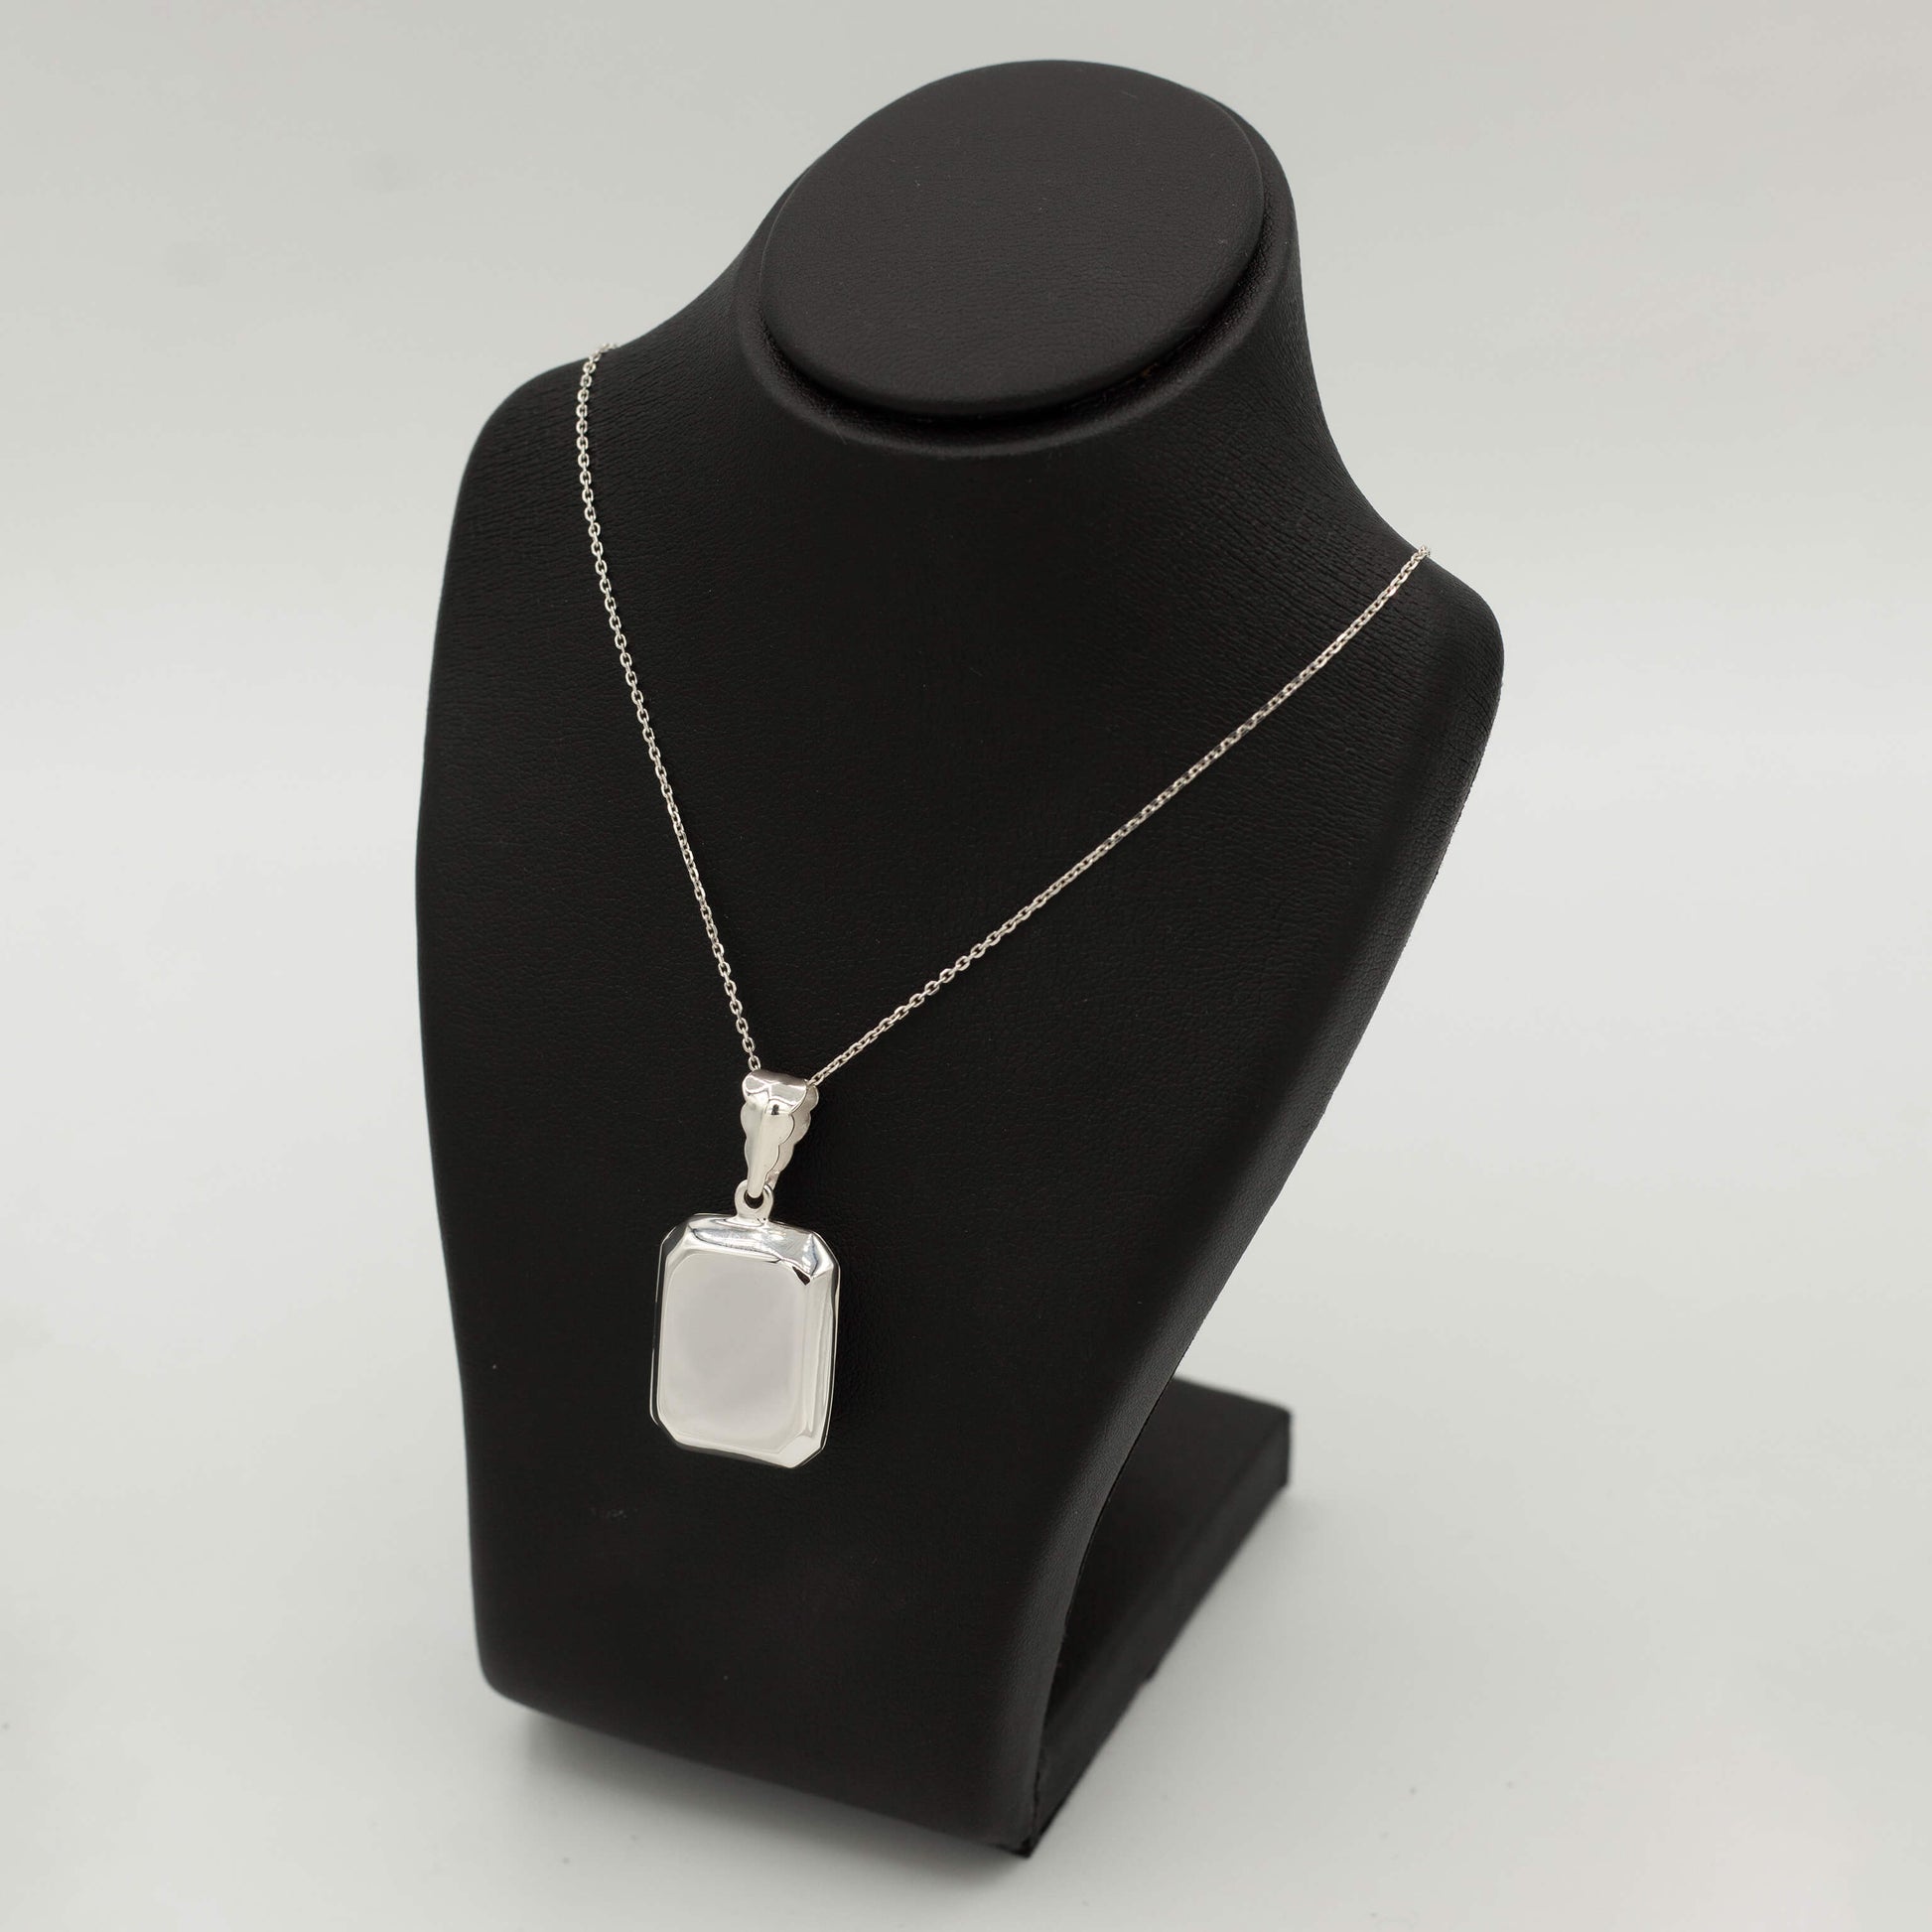 Silver rectangle shaped locket hung on a black bust